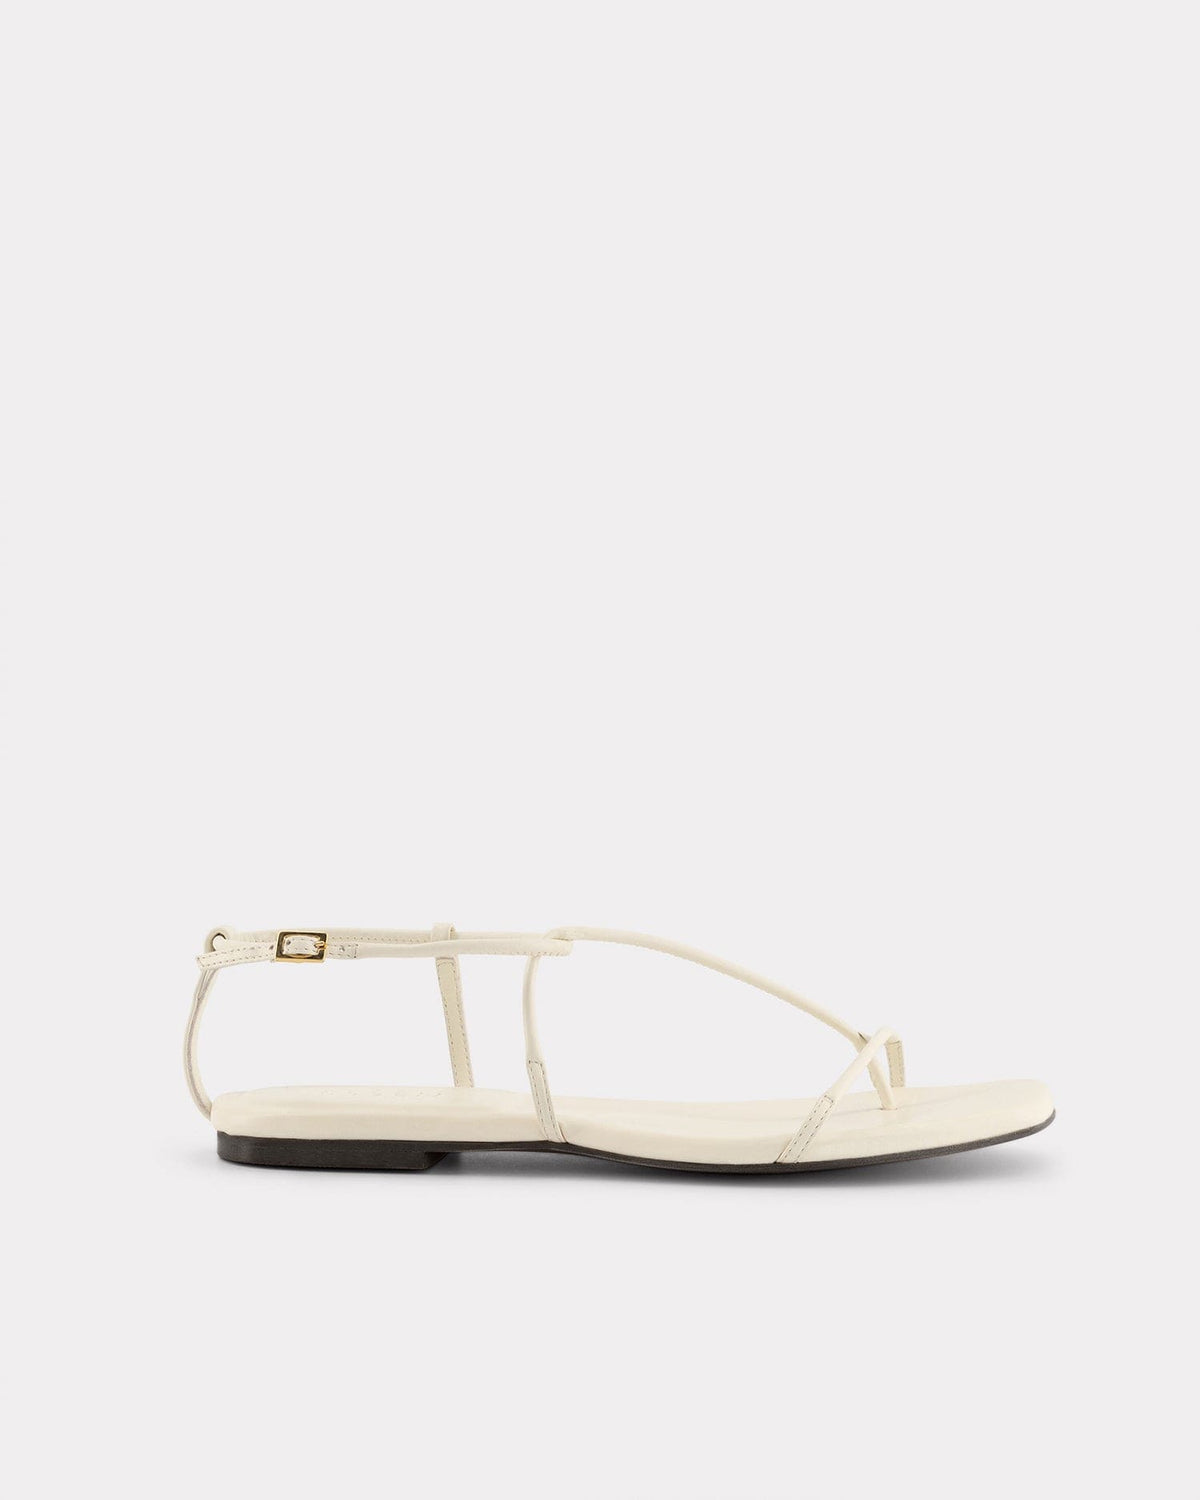 The Evening Sandal - Butter  ESSĒN Cream Leather 35